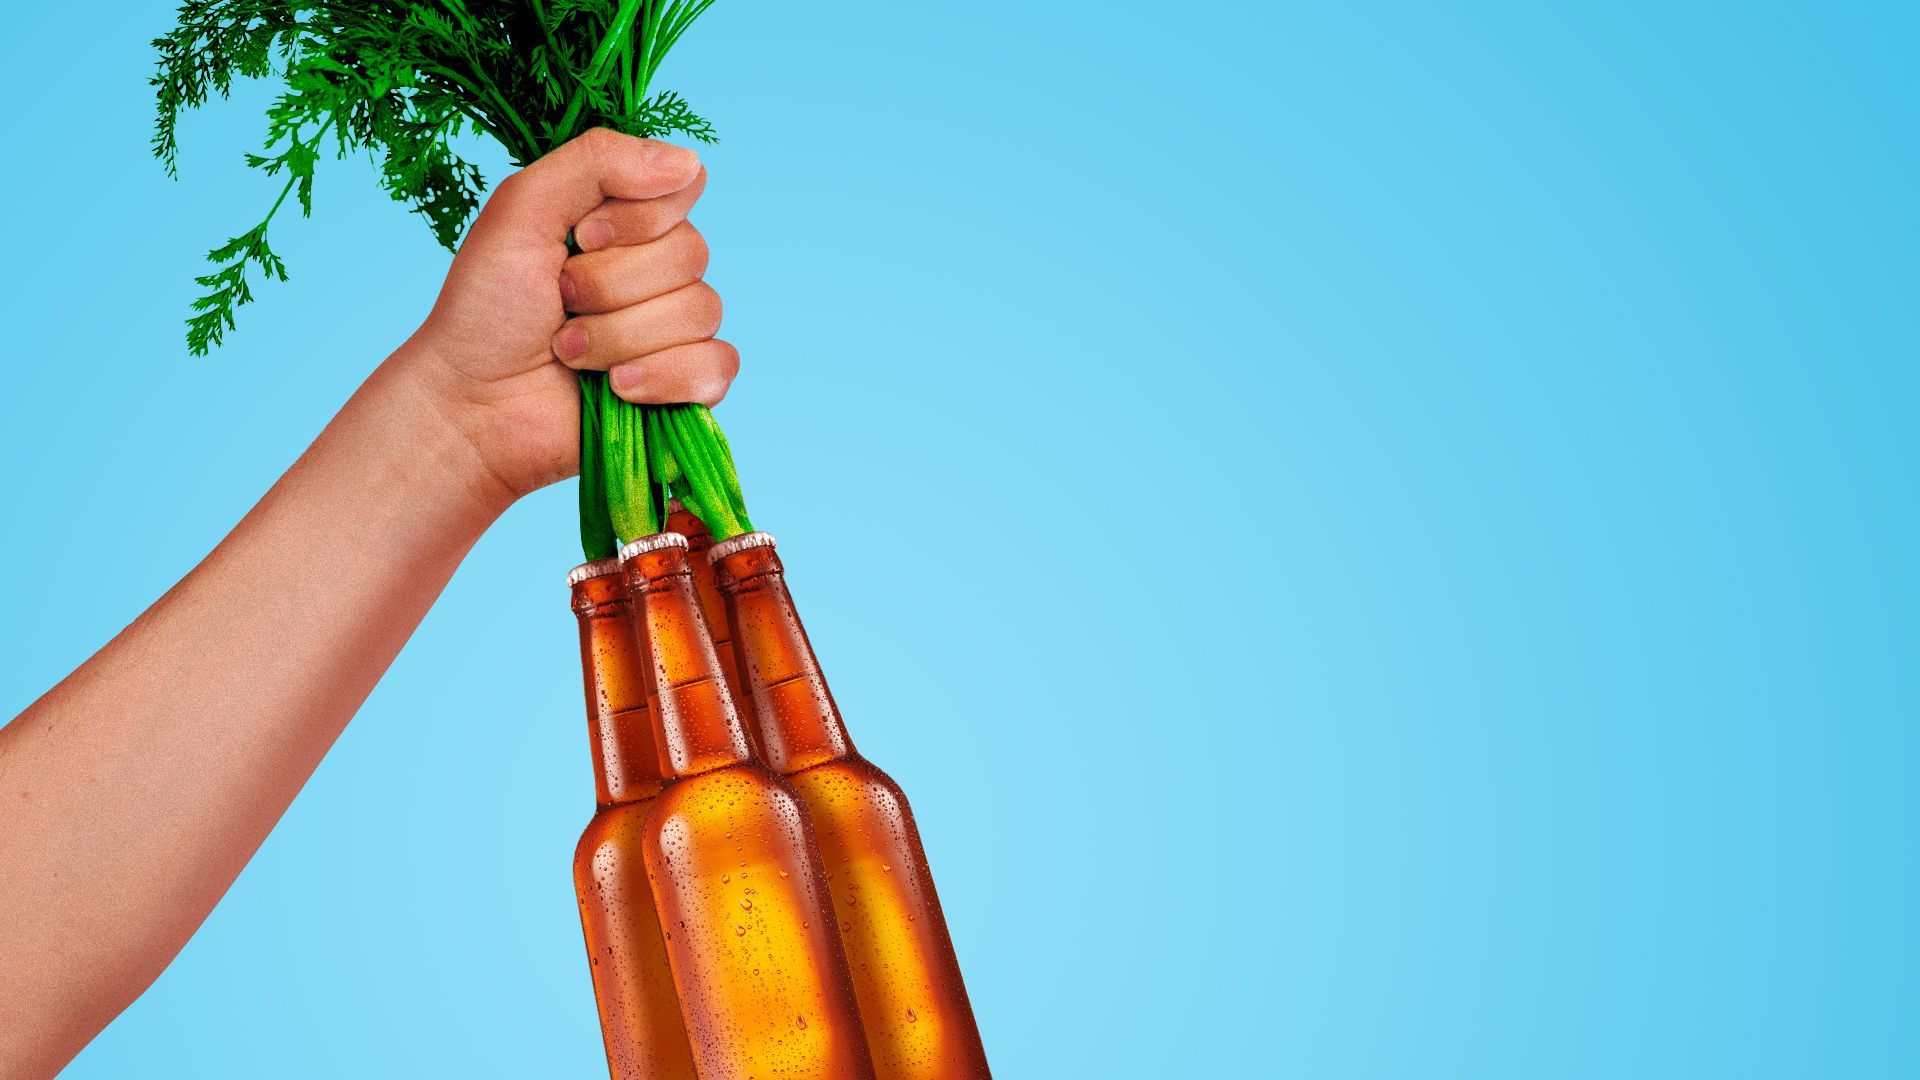 Illustration of a hand pulling up a bunch of beers from the leafy tops, as if they were carrots.  